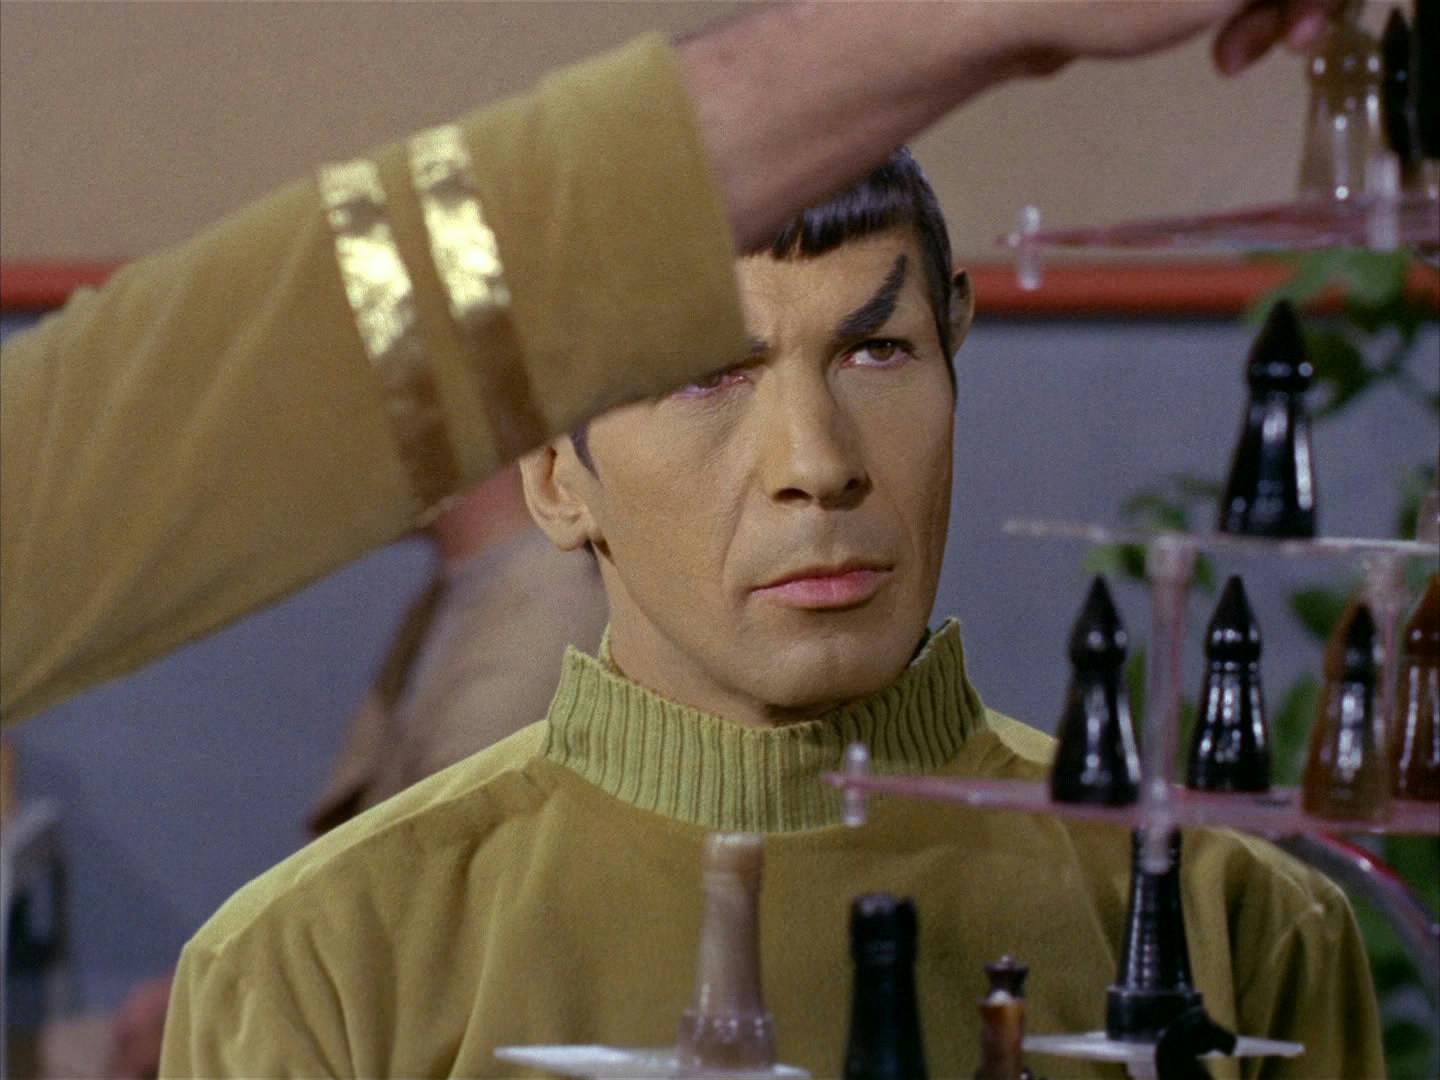 Spock is focused while Kirk makes his move in three-dimensional chess in 'Where No Man Has Gone Before'